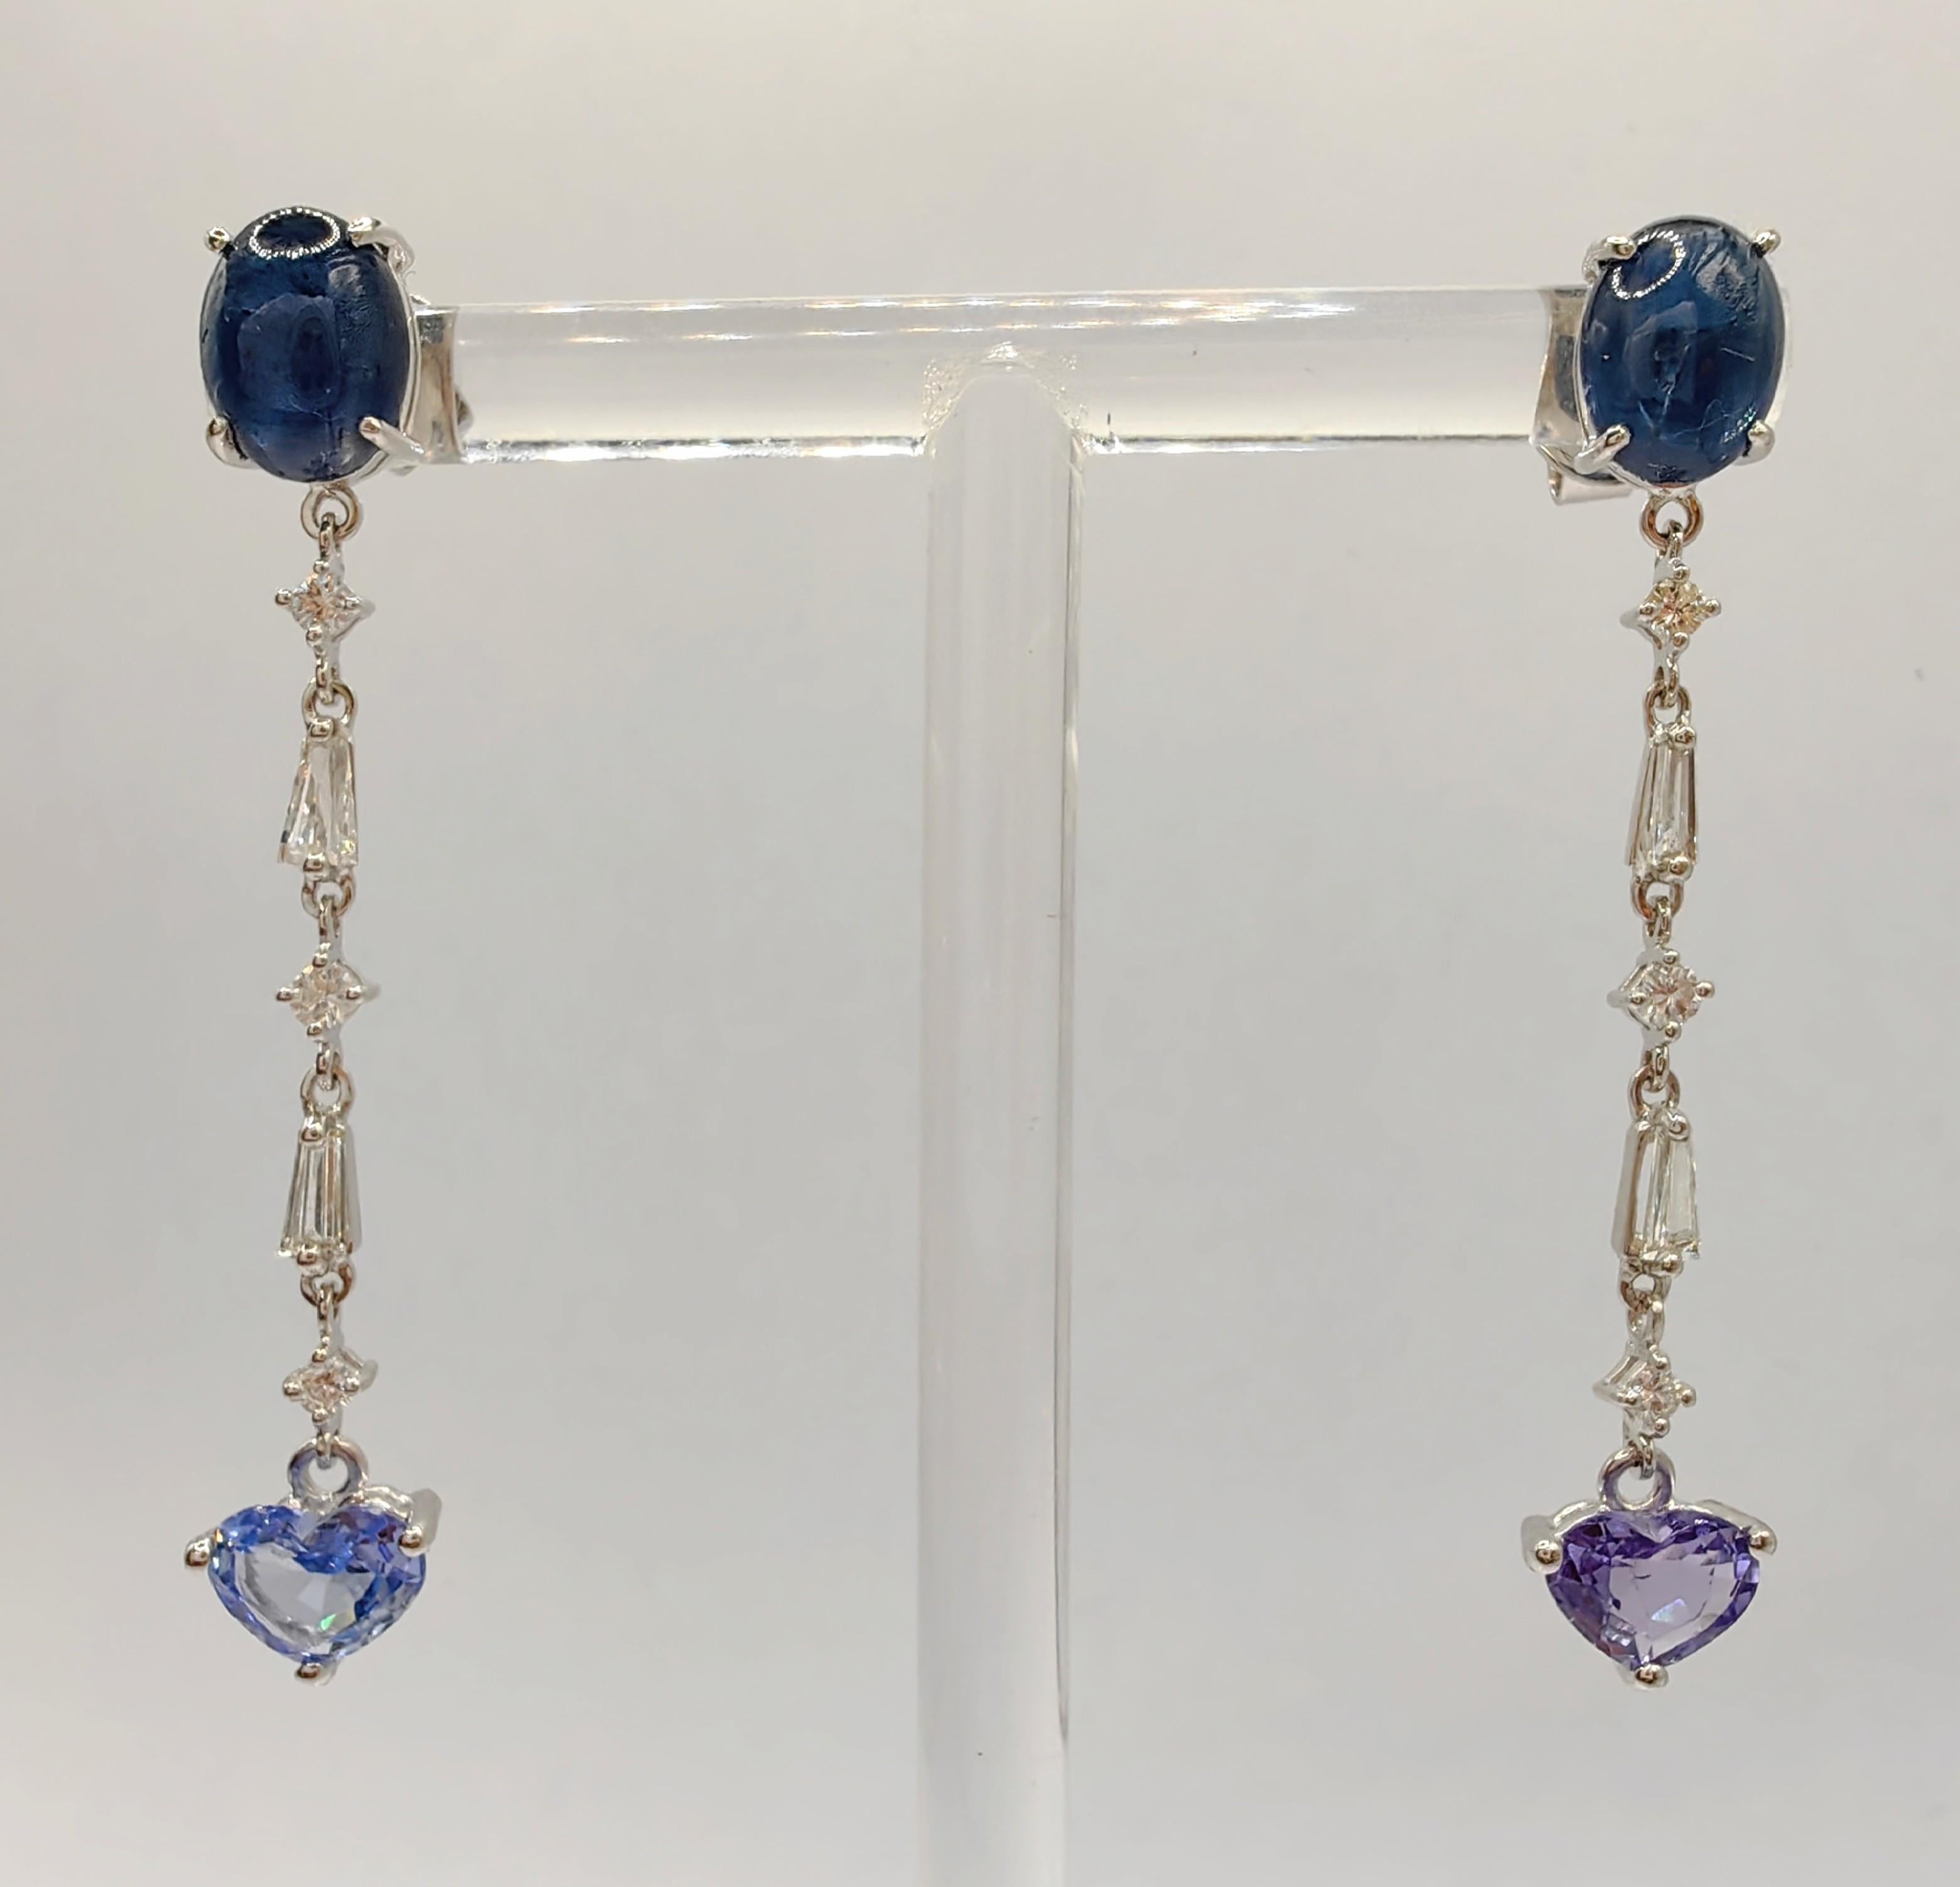 Introducing our Cabochon & Heart Cut Sapphire Diamond Dangling Earrings in 18K White Gold, a mesmerizing testament to elegance and individuality. These exquisite earrings are designed to grace your ears with sophistication, making a statement of